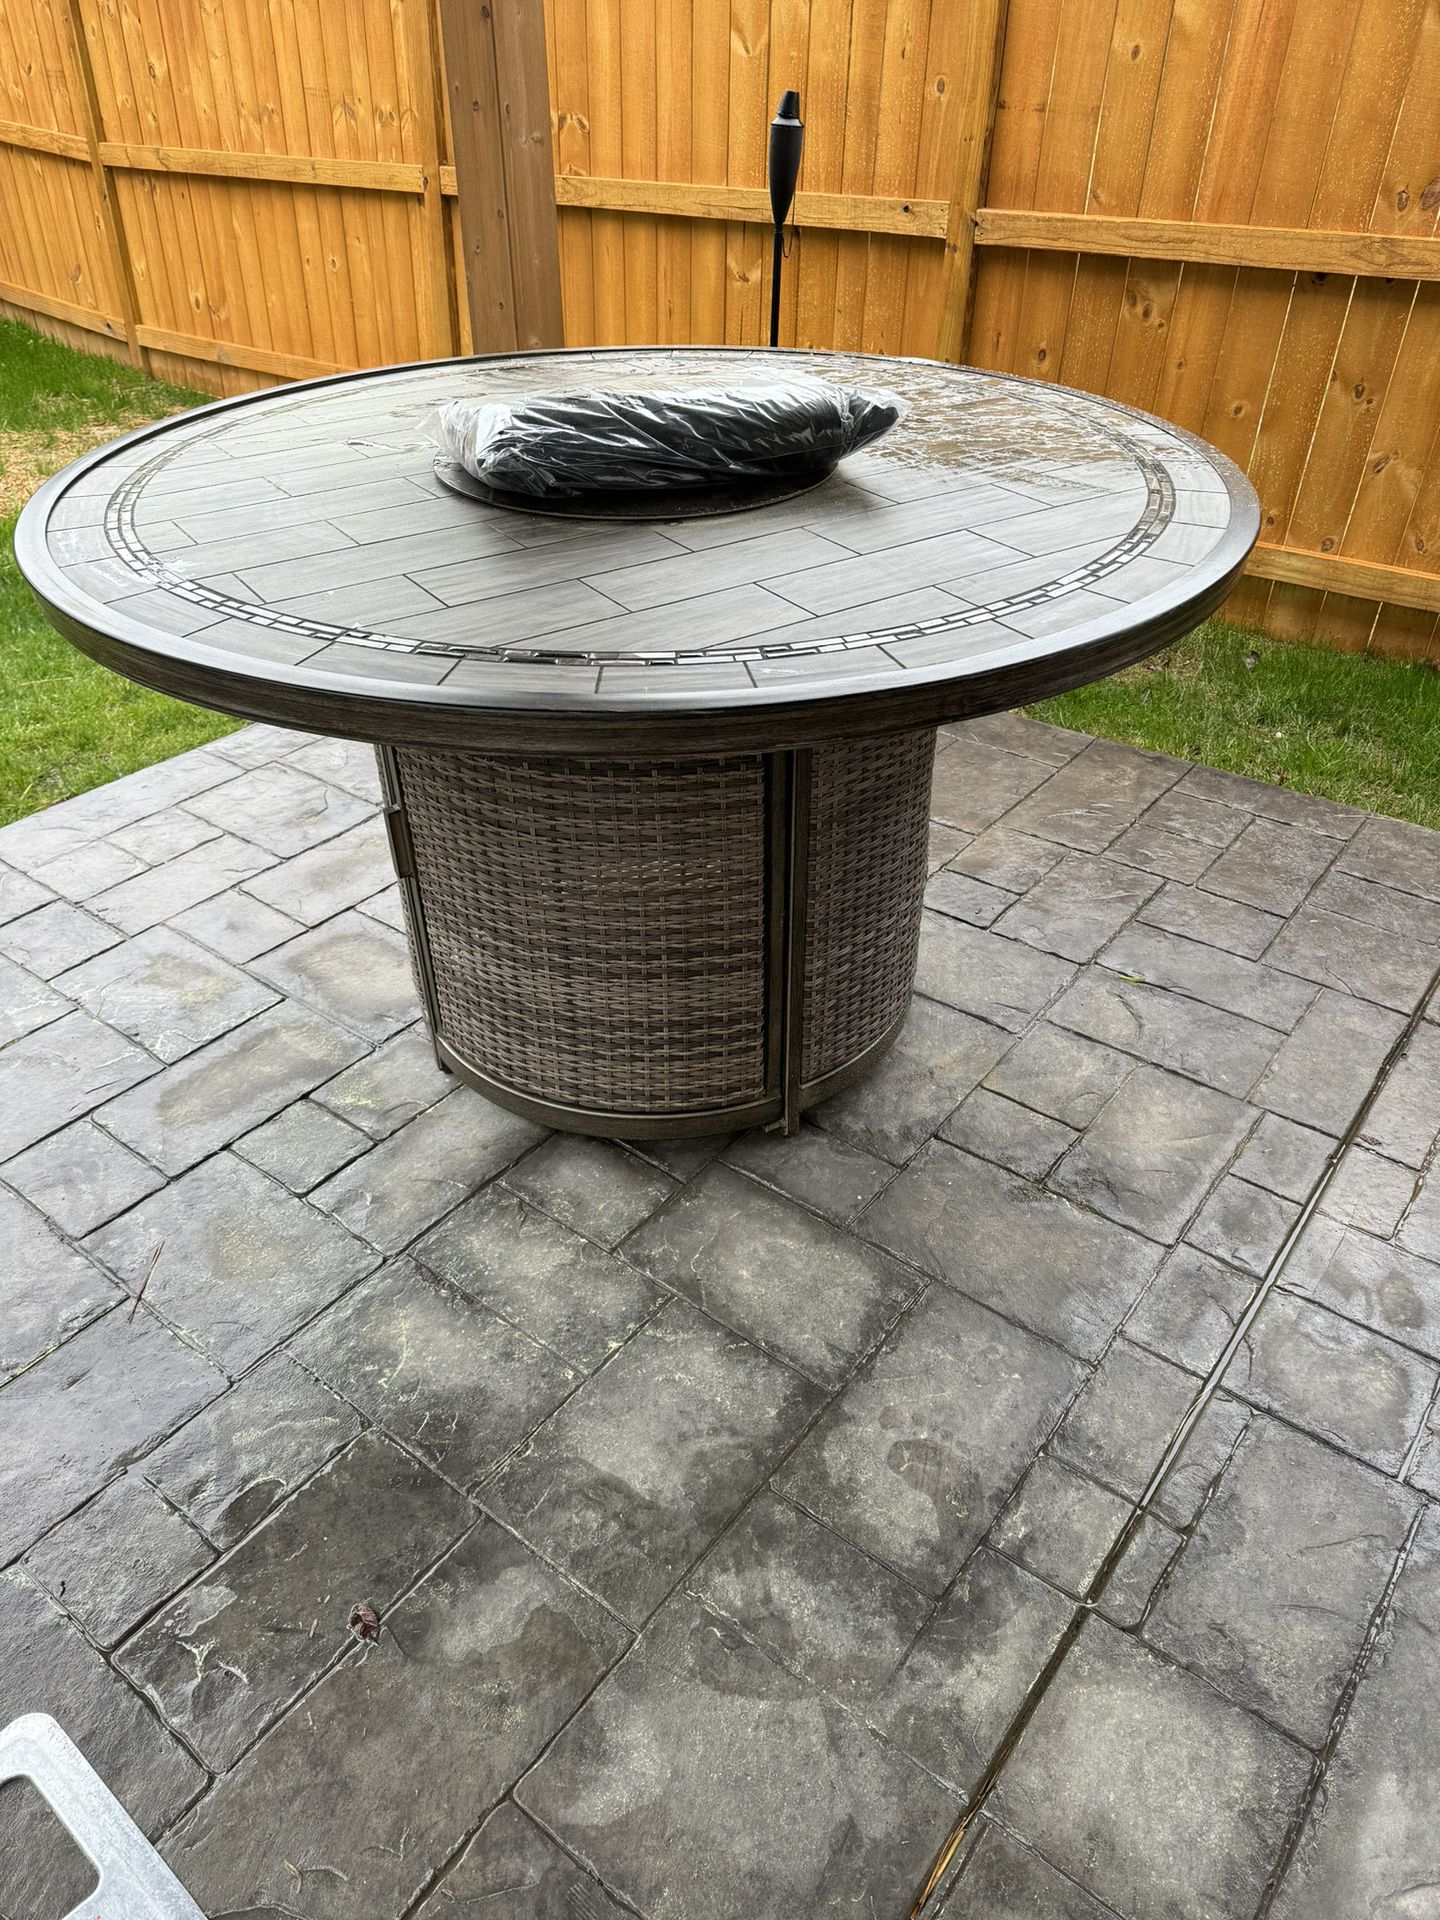 New Outdoor Patio Table With Gas Firepit